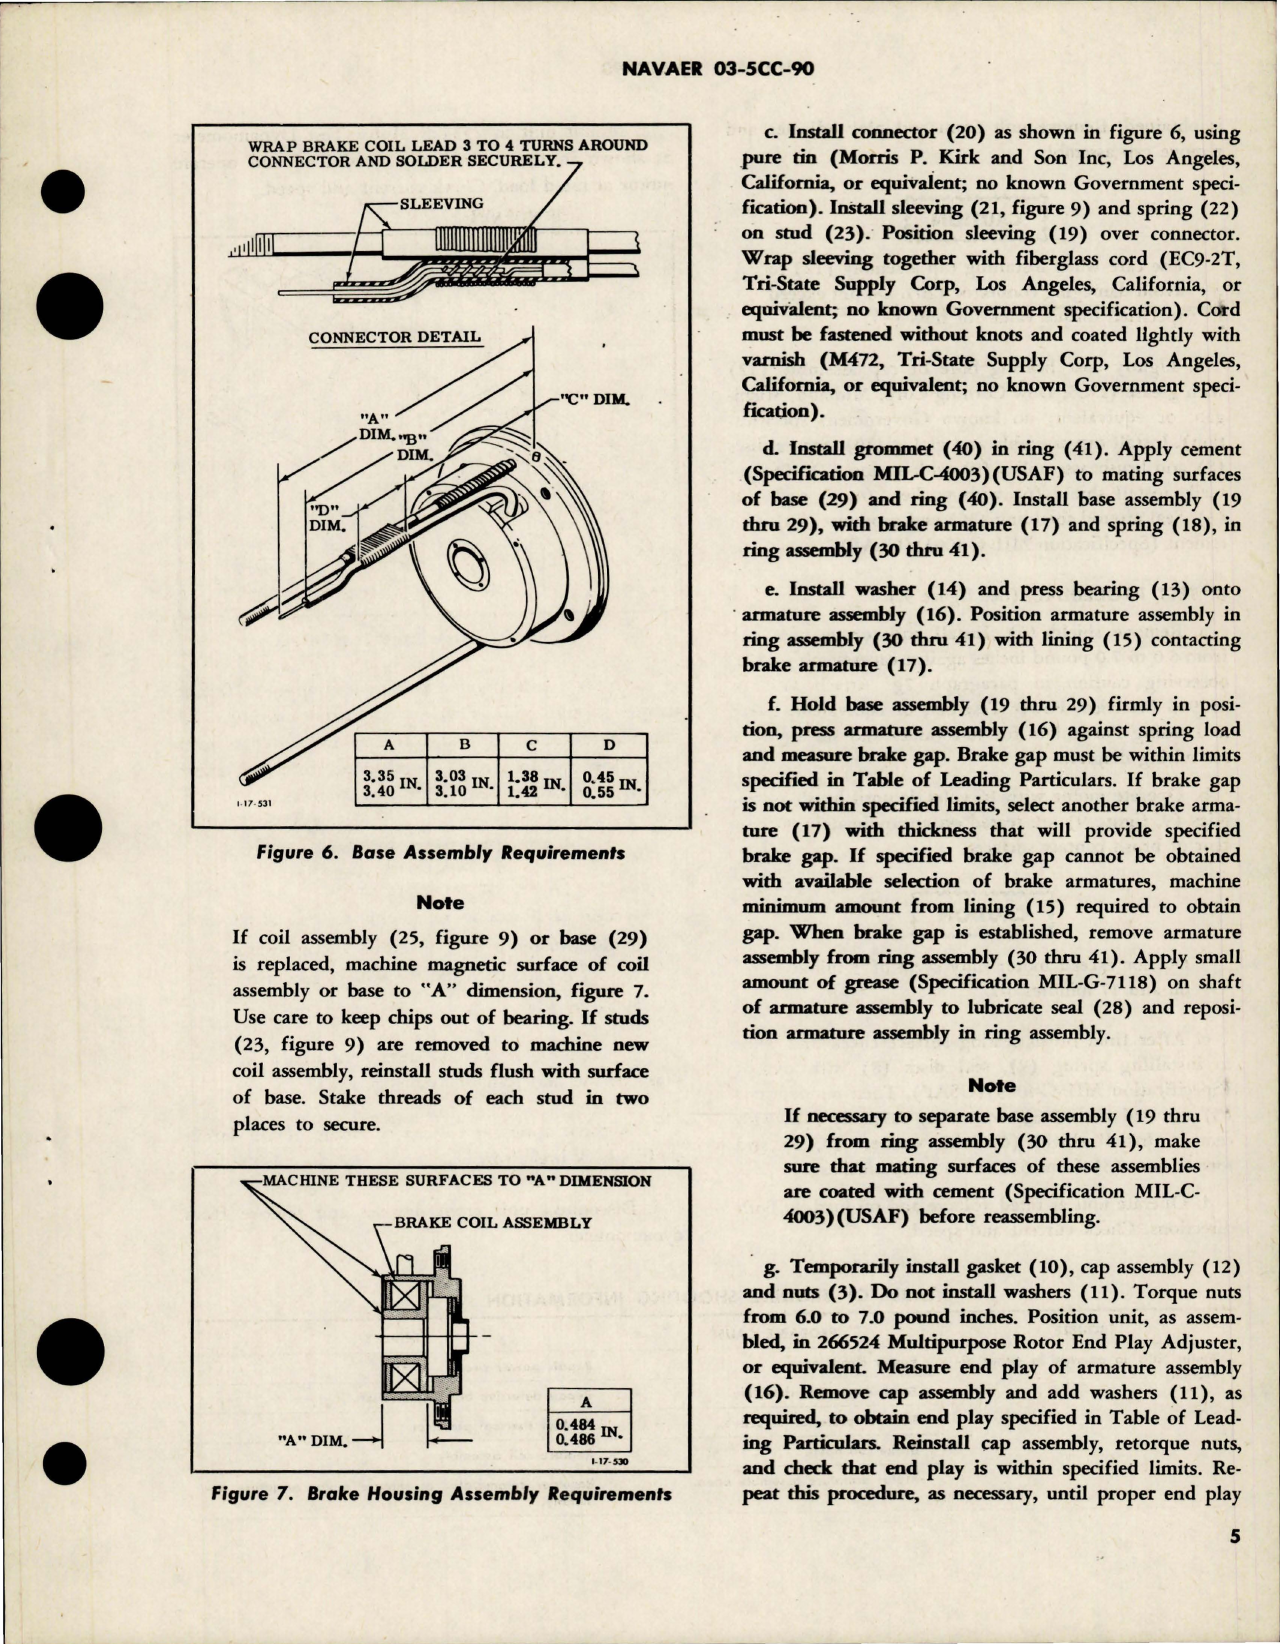 Sample page 7 from AirCorps Library document: Overhaul Instructions with Parts Breakdown for Direct Current Motor - 0.08HP 26 Volt - Part 26300-2 